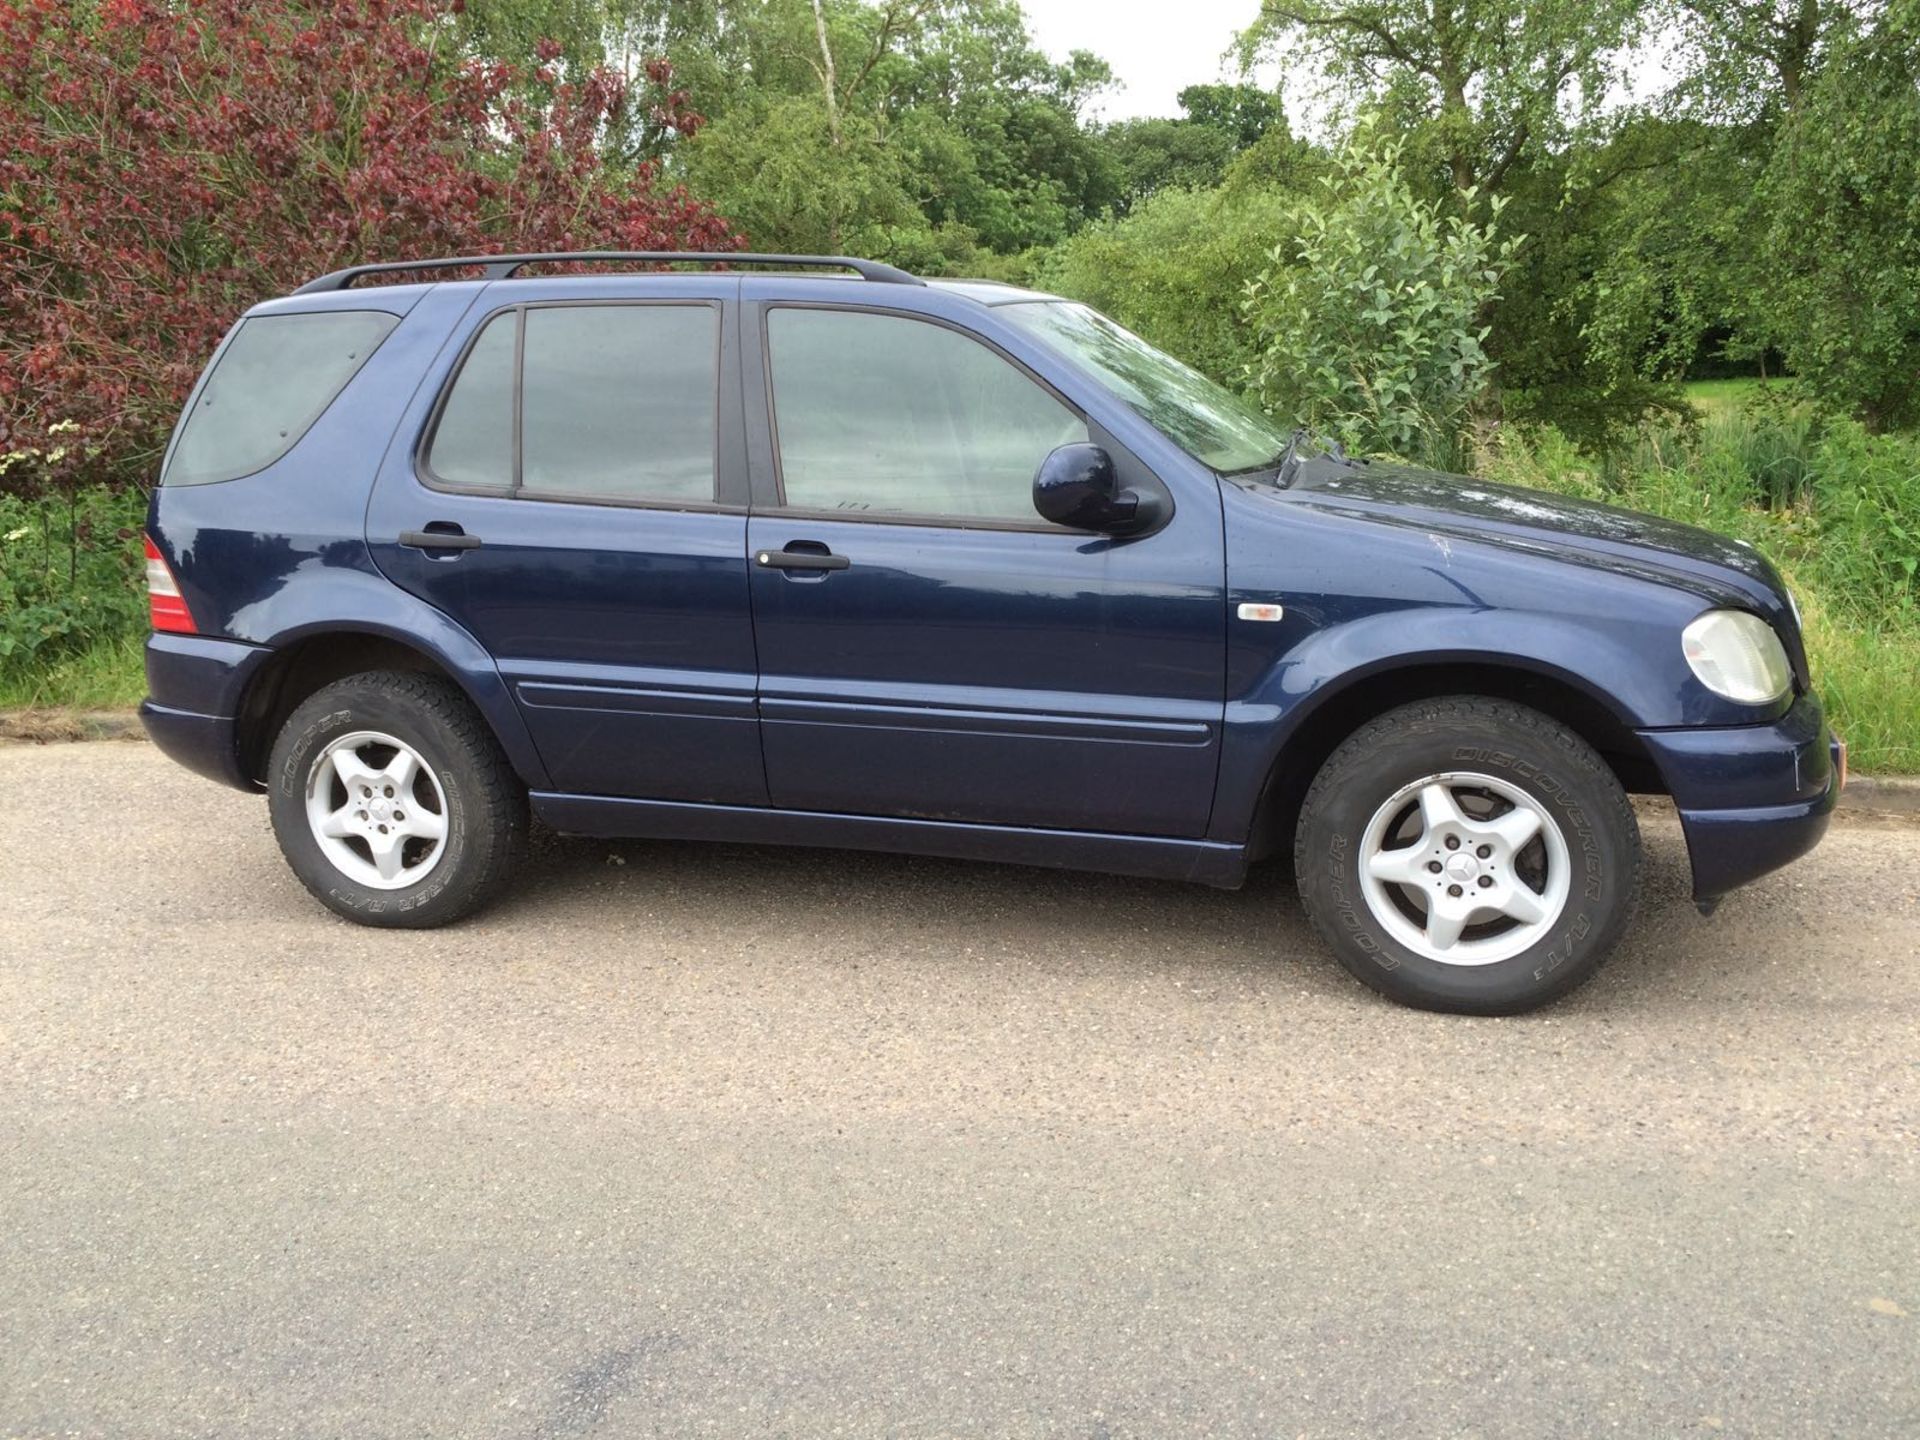 2000 MERCEDES BENZ ML270 CDI AUTO (7 SEATER) **NO VAT ON HAMMER PRICE** - Image 3 of 19